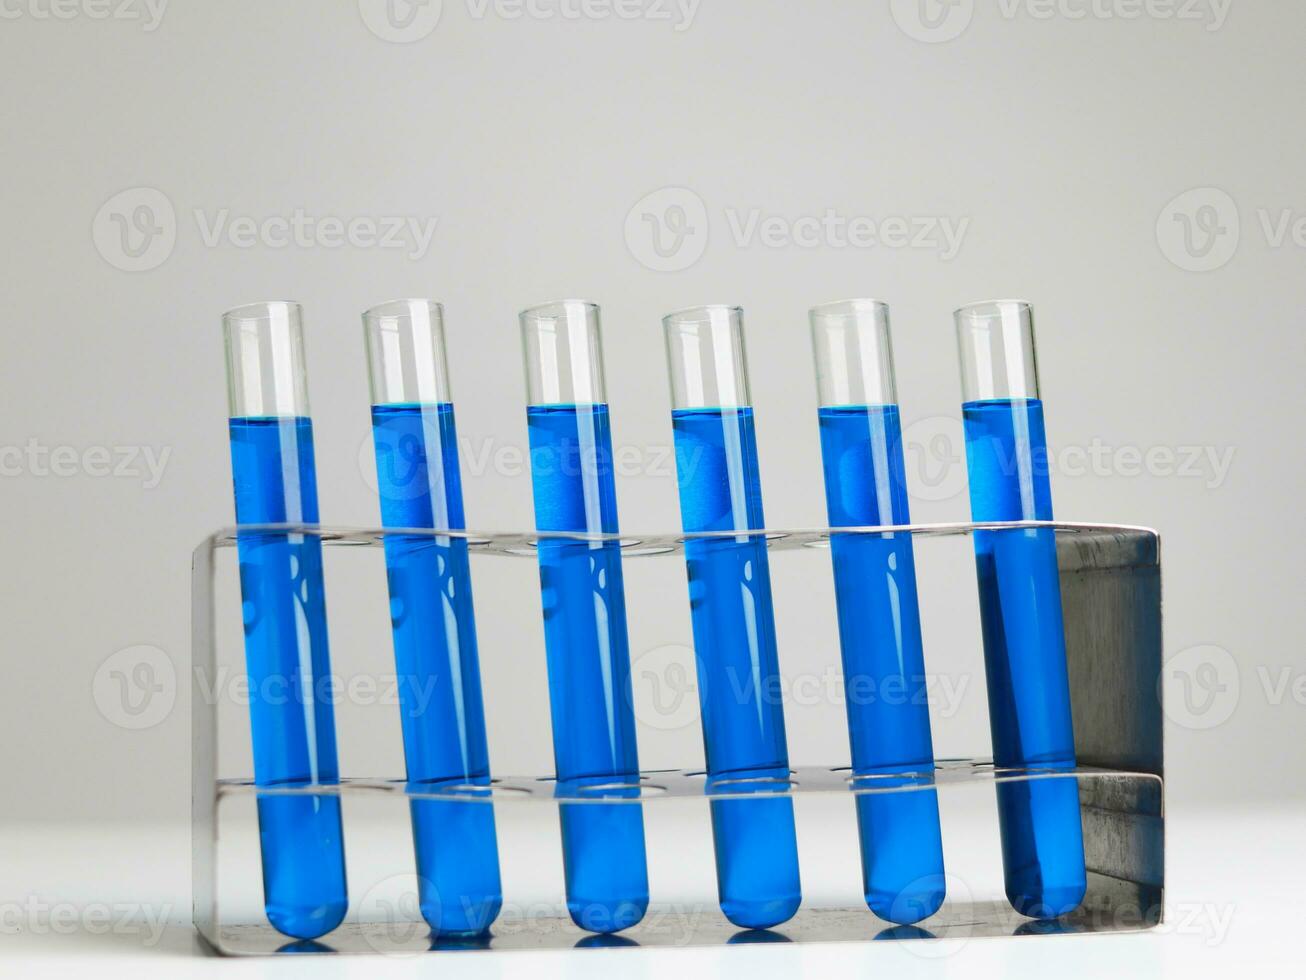 science experiment equipment and microscopes for chemistry, biology, microbiology, bacteriology, virology laboratories for scientists, researchers, medical education or pharmacology.medical, clinic. photo